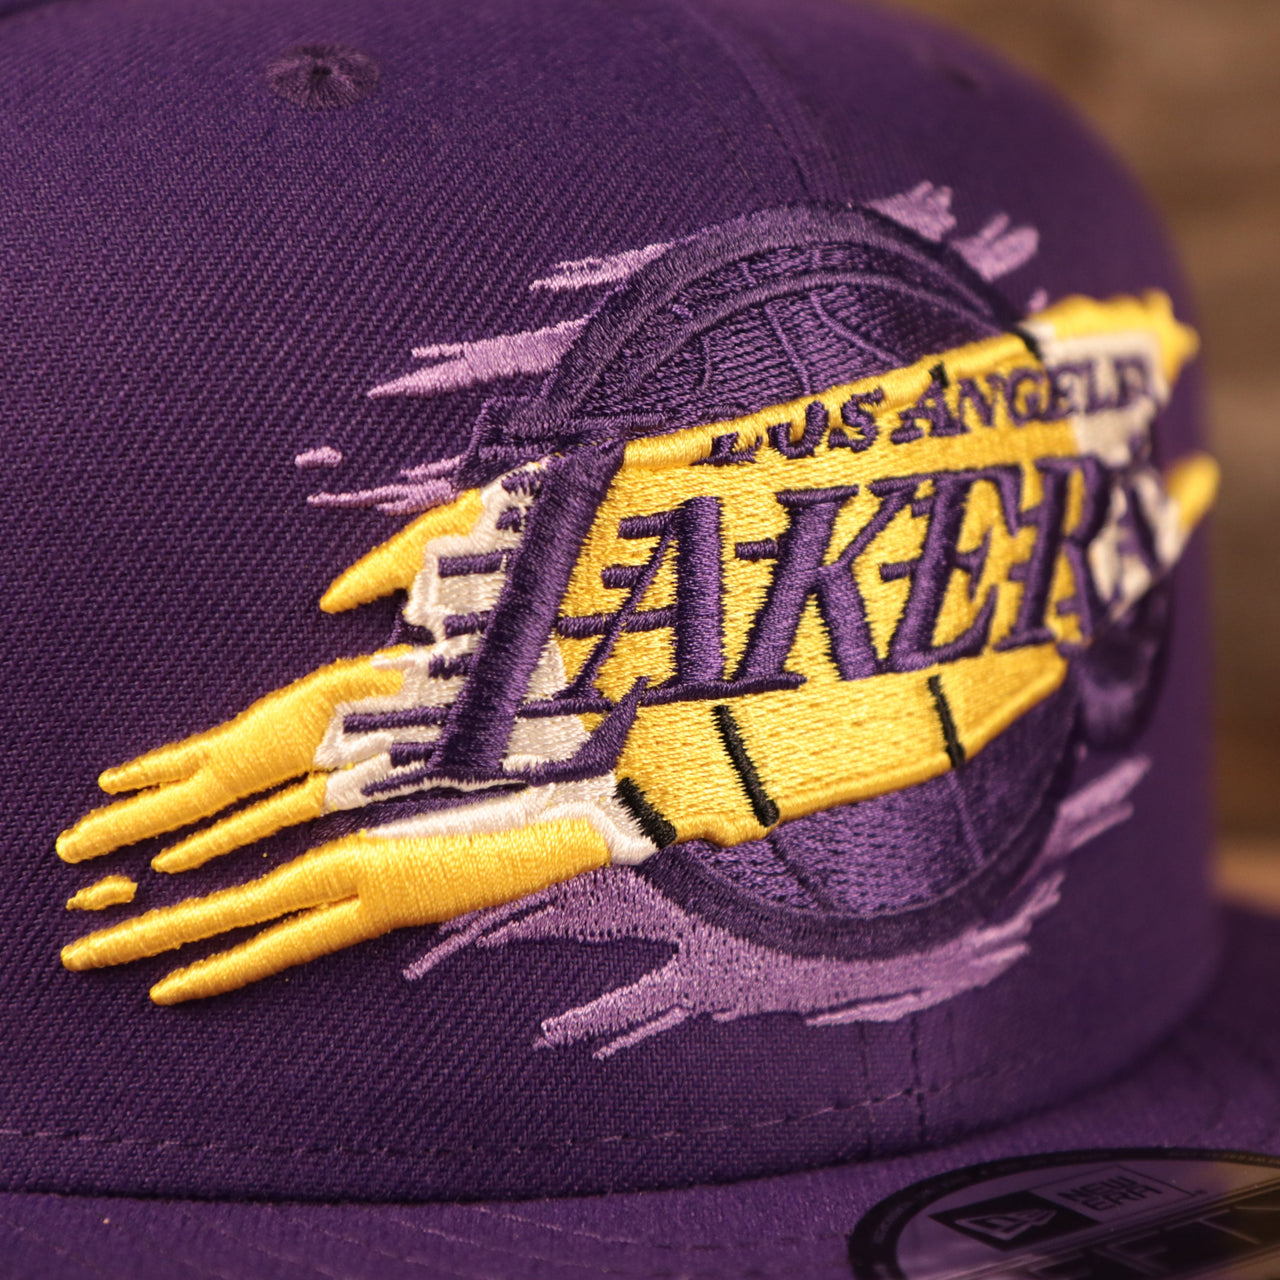 The Los Angeles Lakers logo tear patch on the front side of the purple 950 snapback hat.